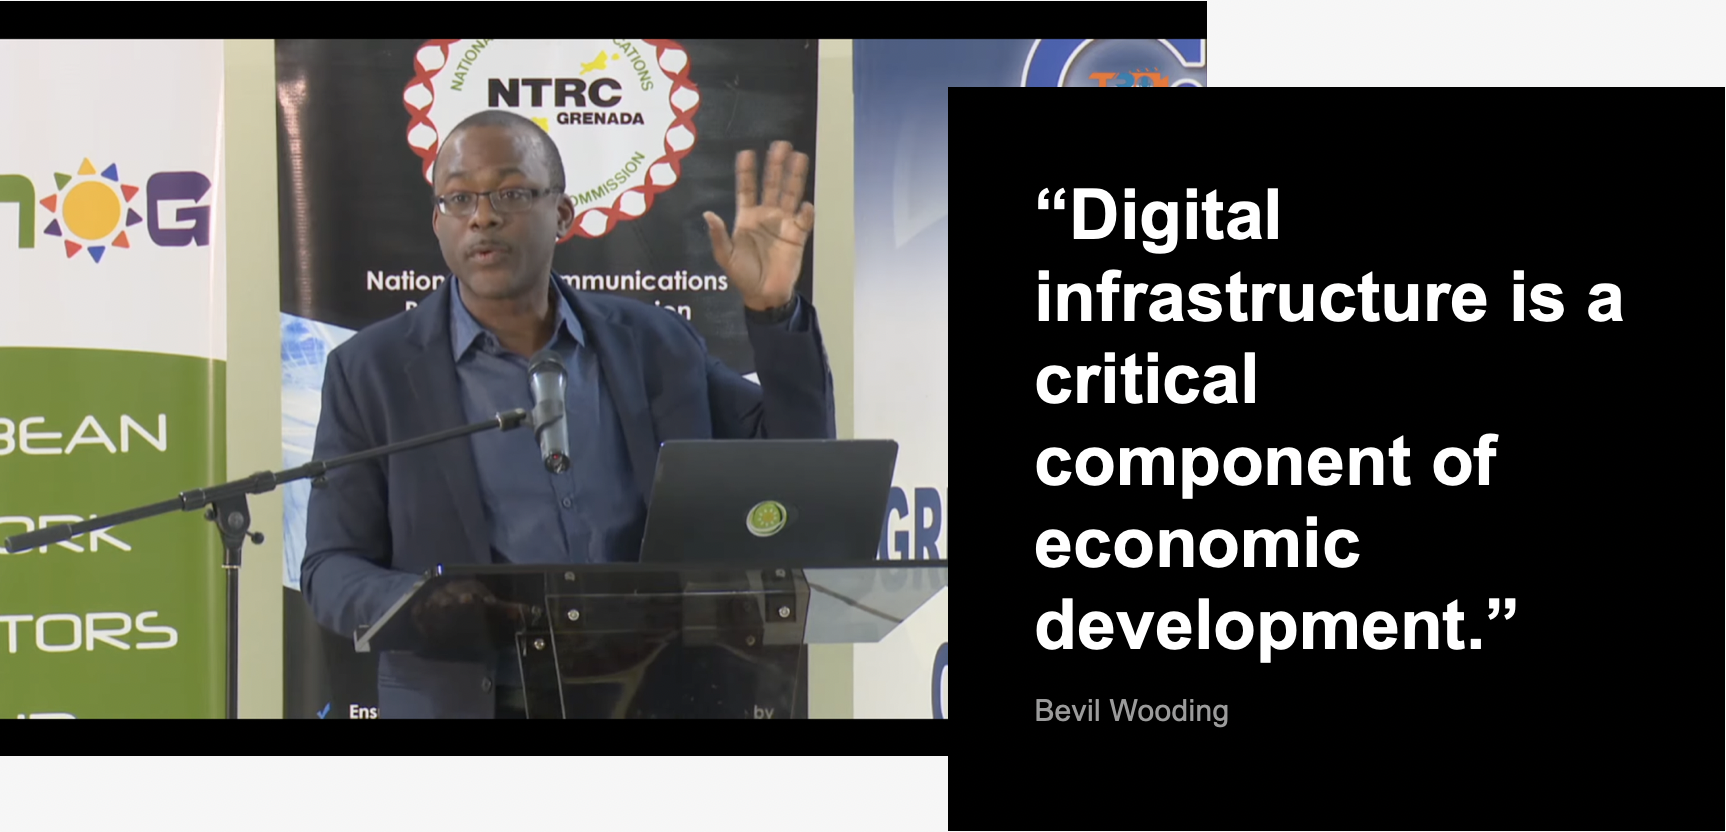 Caribbean Infrastructure Investment Must Keep Pace with Global Digital Trends